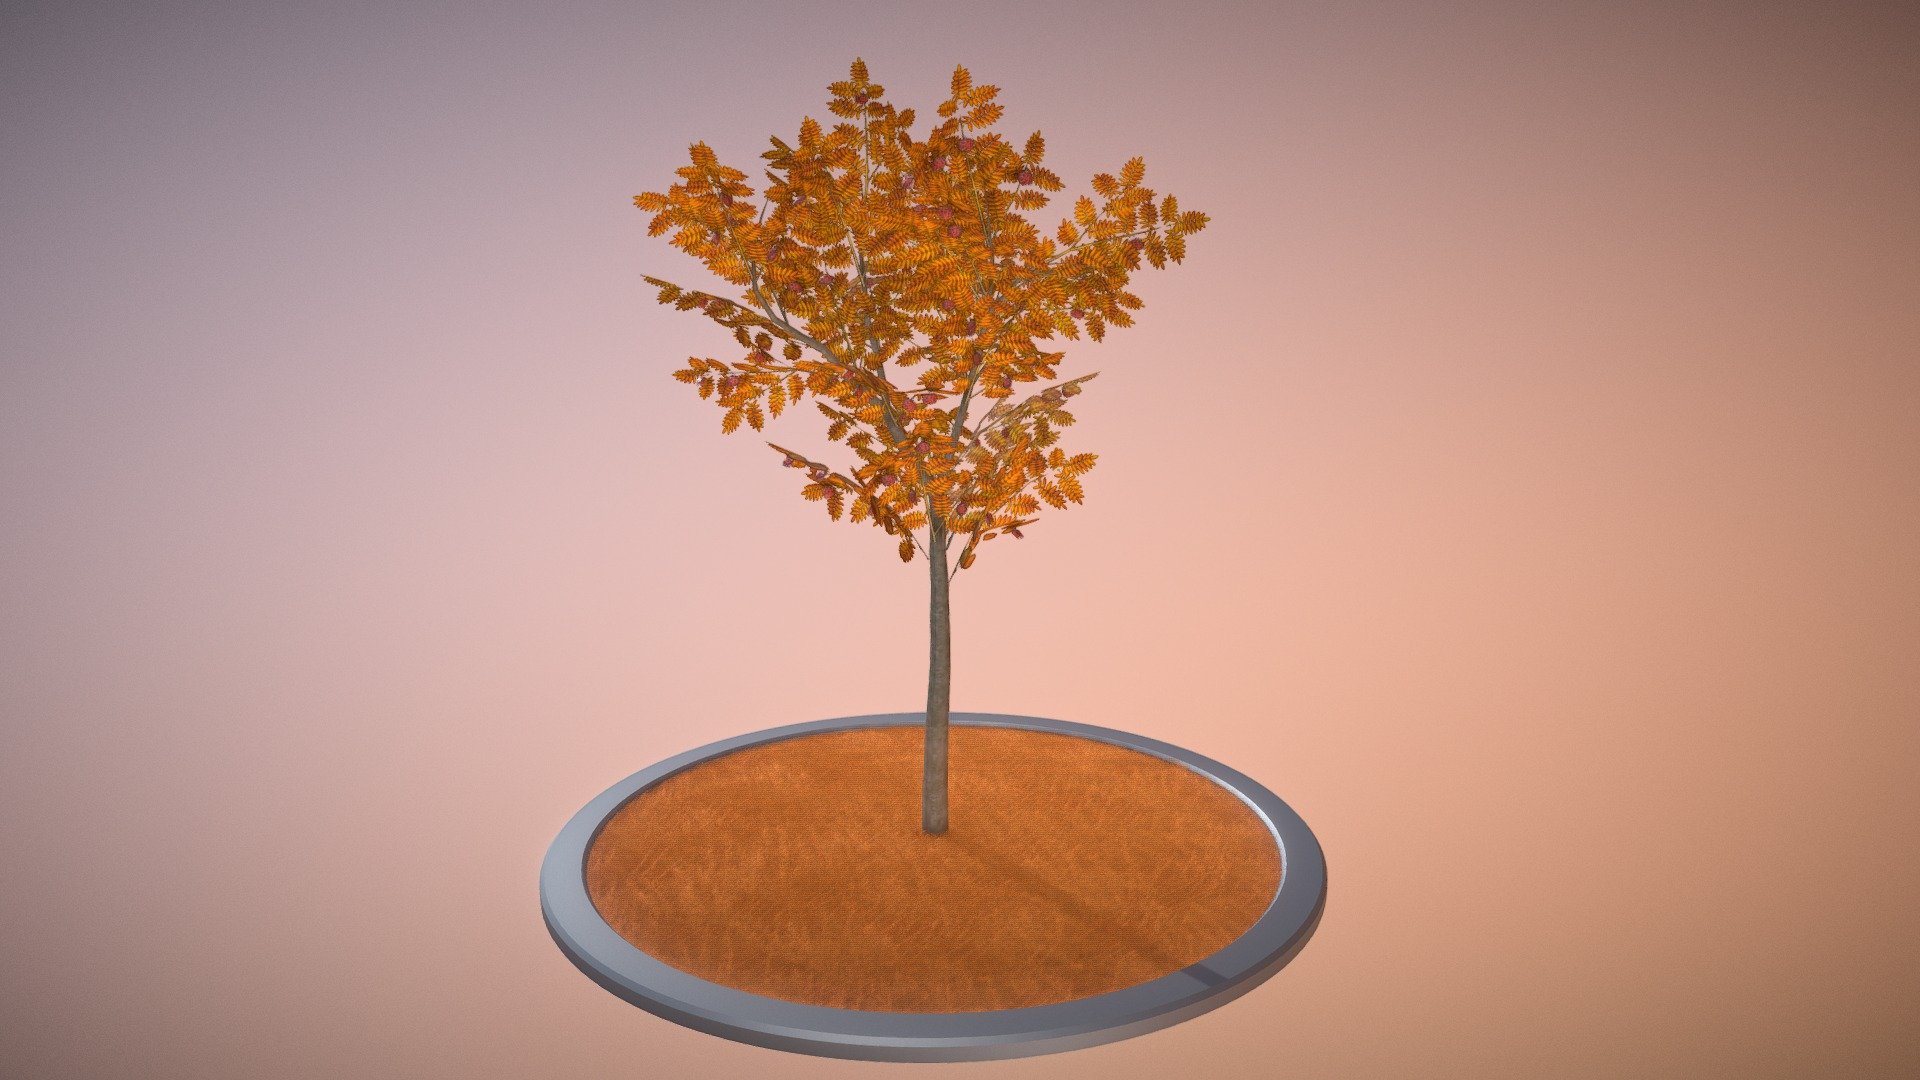 Here is a 4 meter high rowan tree sorbus-aucuparia in Autumn season.

Ein 3d-Objekt aus dem VIS-All Baum Module 4 



Textures:

-Color map

-Normal map

Here on Sketchfab you can see and purchase some of our 3d-models which we are using in our projects for VIS-All.

This model was created by 3DHaupt for the Software-Service John GmbH.

The model was created in Blender-3d - Rowan Tree - Sorbus-Aucuparia - 4m - Autumn - Buy Royalty Free 3D model by VIS-All-3D (@VIS-All) 3d model